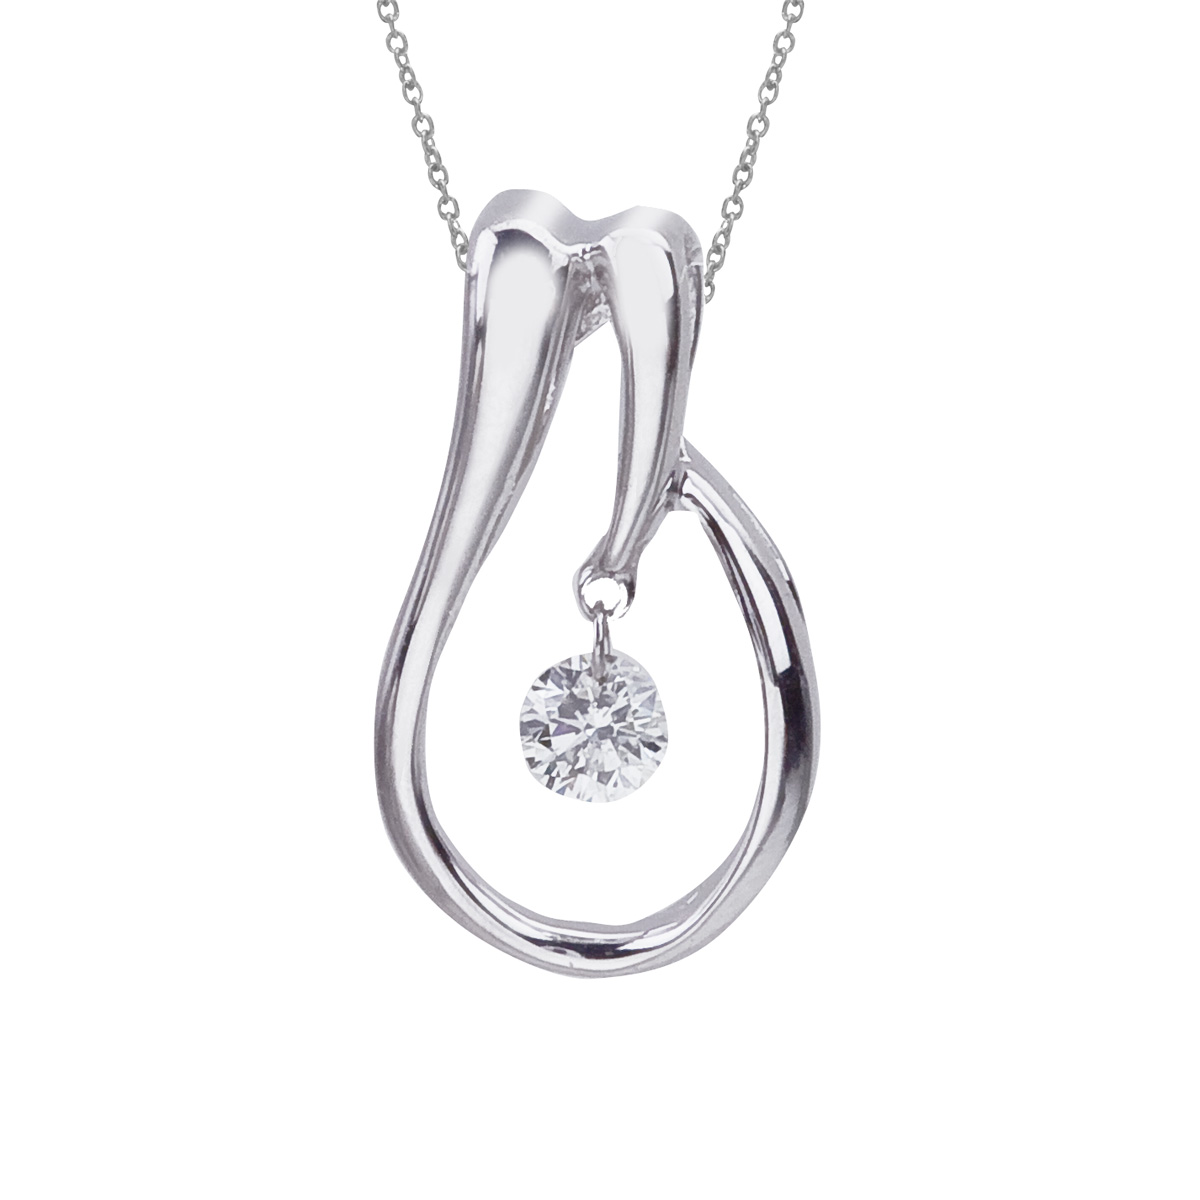 JCX2908: 14k gold Dashinng Diamonds pendant with 0.10 total ct diamonds. The center dangling diamond dances and shimmers with every heartbeat.